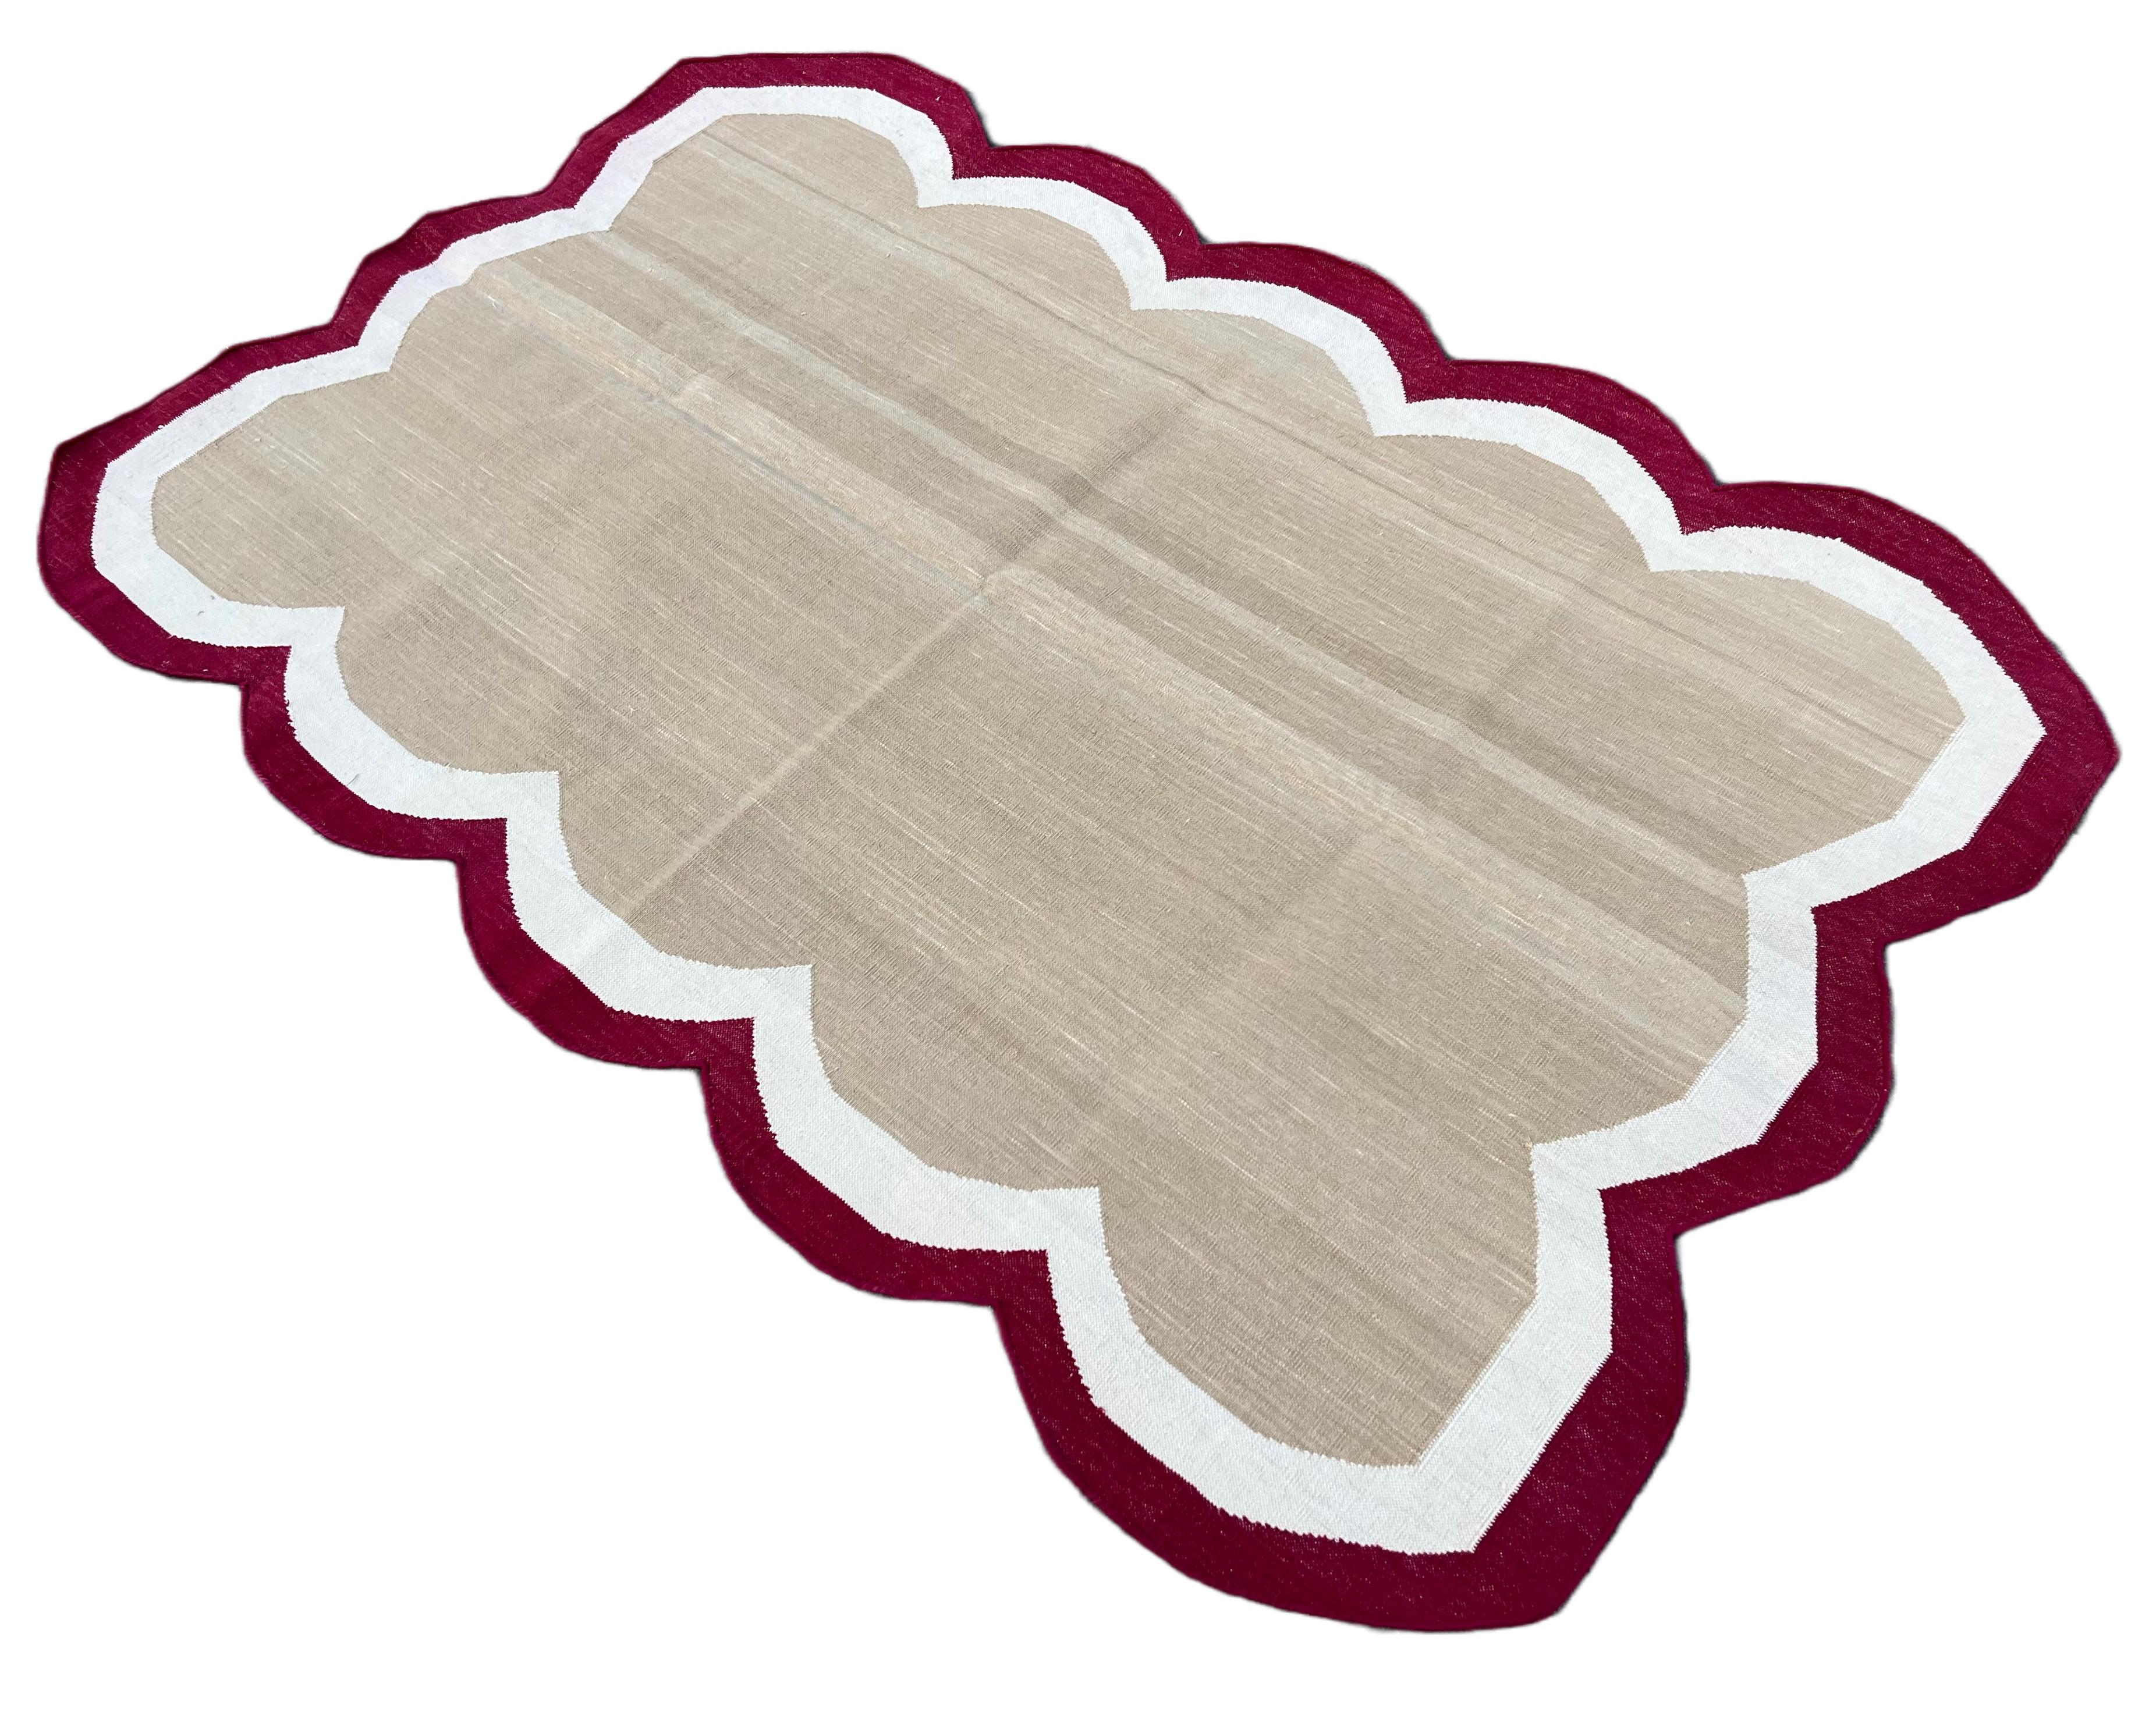 Cotton Vegetable Dyed Beige, Cream And Red Four Sided Scalloped Rug-3'x5' 
(Scallops runs on all Four Sides)
These special flat-weave dhurries are hand-woven with 15 ply 100% cotton yarn. Due to the special manufacturing techniques used to create